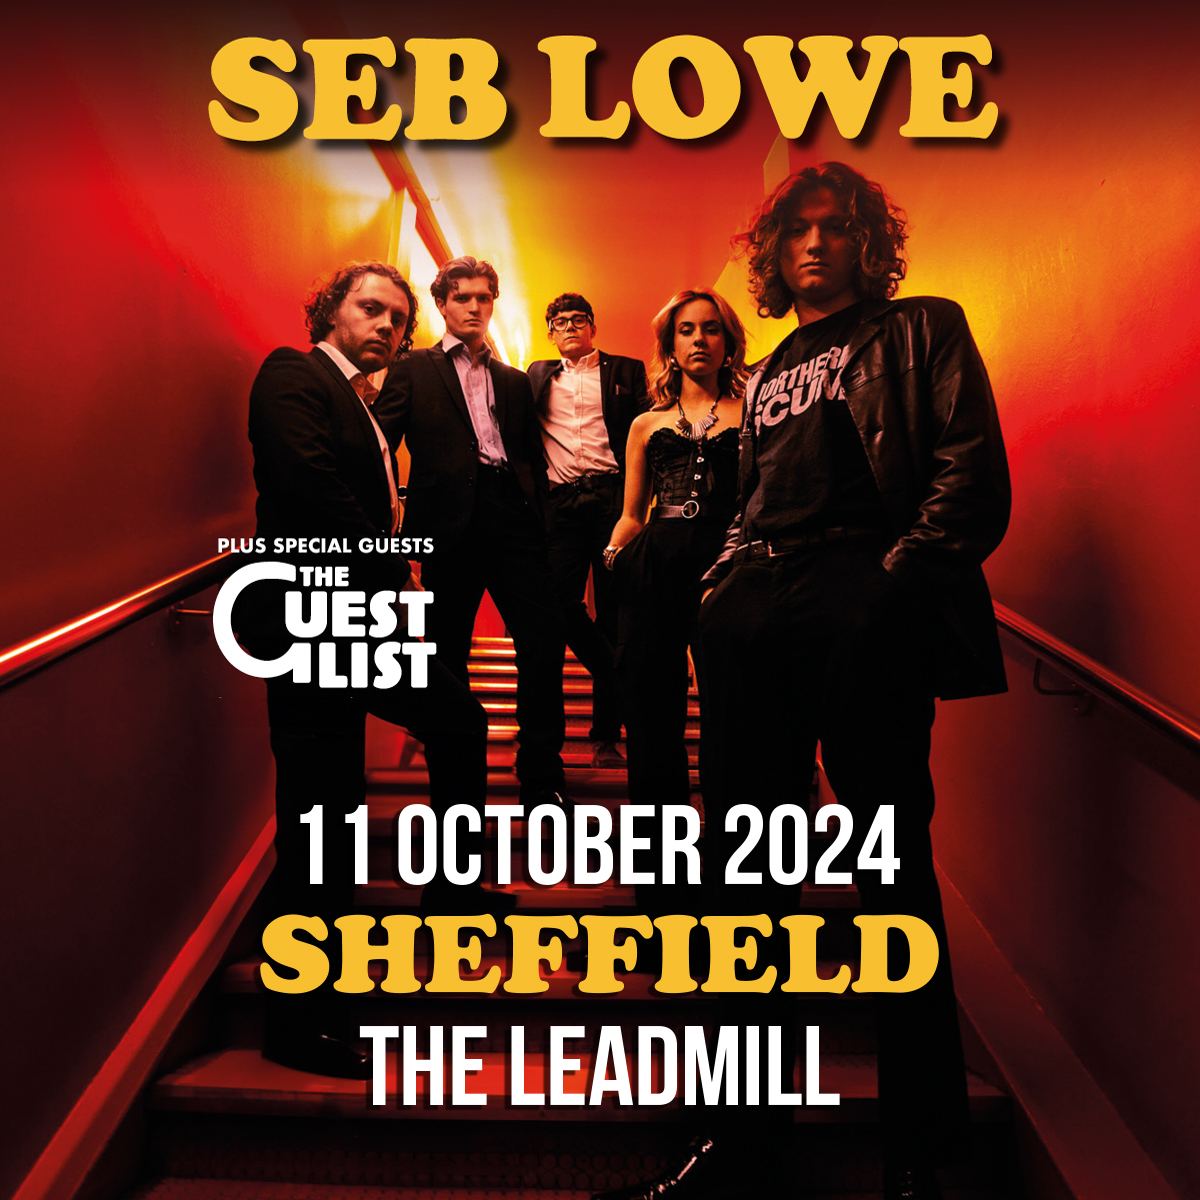 New Show Announcement - Seb Lowe 🚨 Ferocious takes on modern life, political turmoil and finding identity, acclaimed indie songsmith @Seb_lowe_music returns to Sheffield this October for a huge headline show 🎉 Tickets on sale this Friday at 10am from leadmill.co.uk/event/seb-lowe/